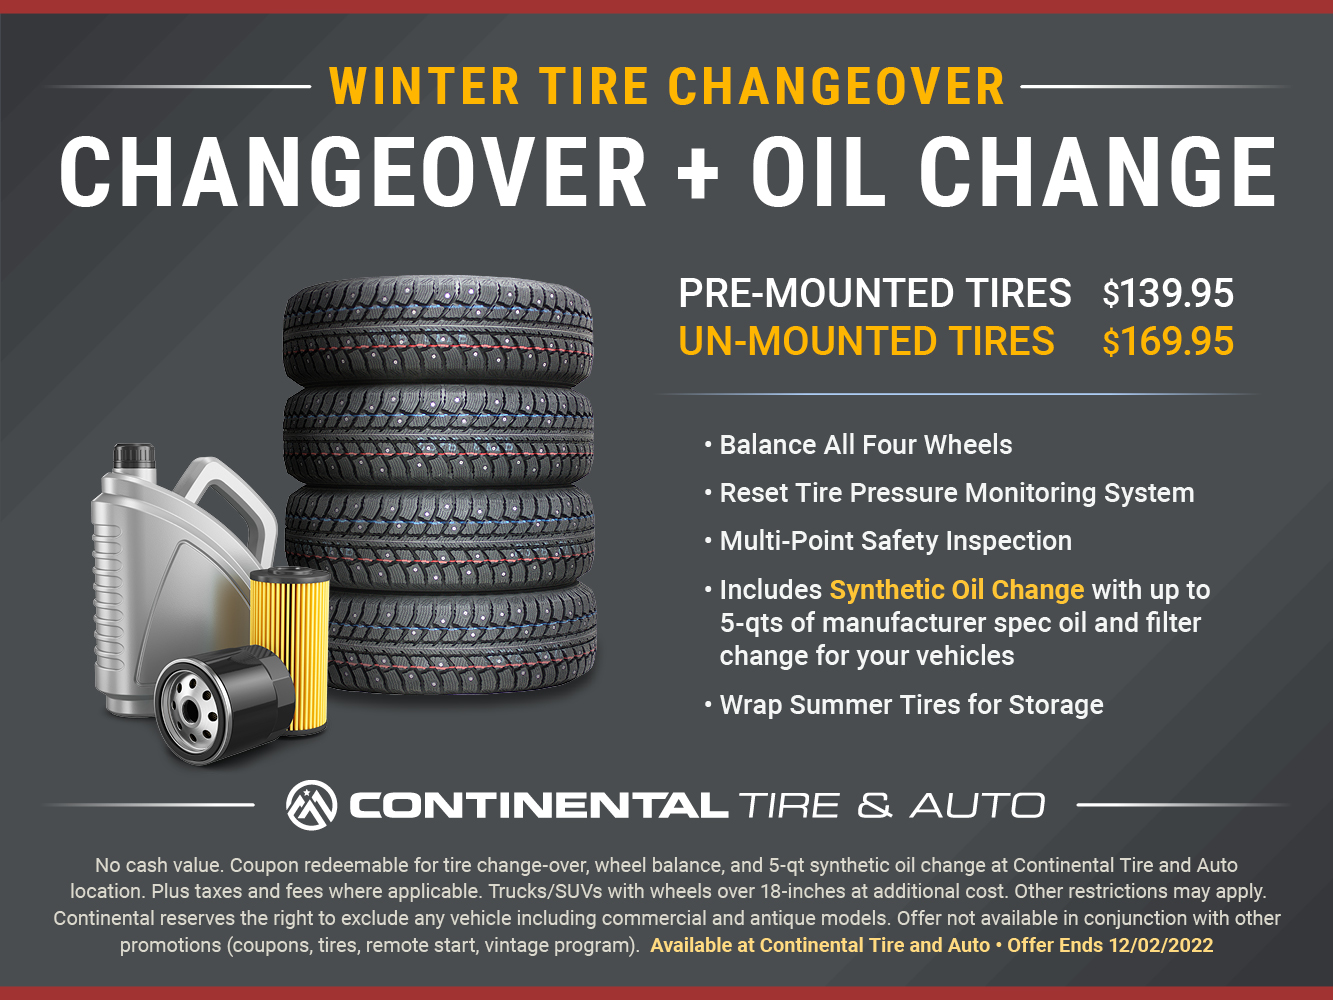 2022 Winter Tire Changeover + Synthetic Oil Change